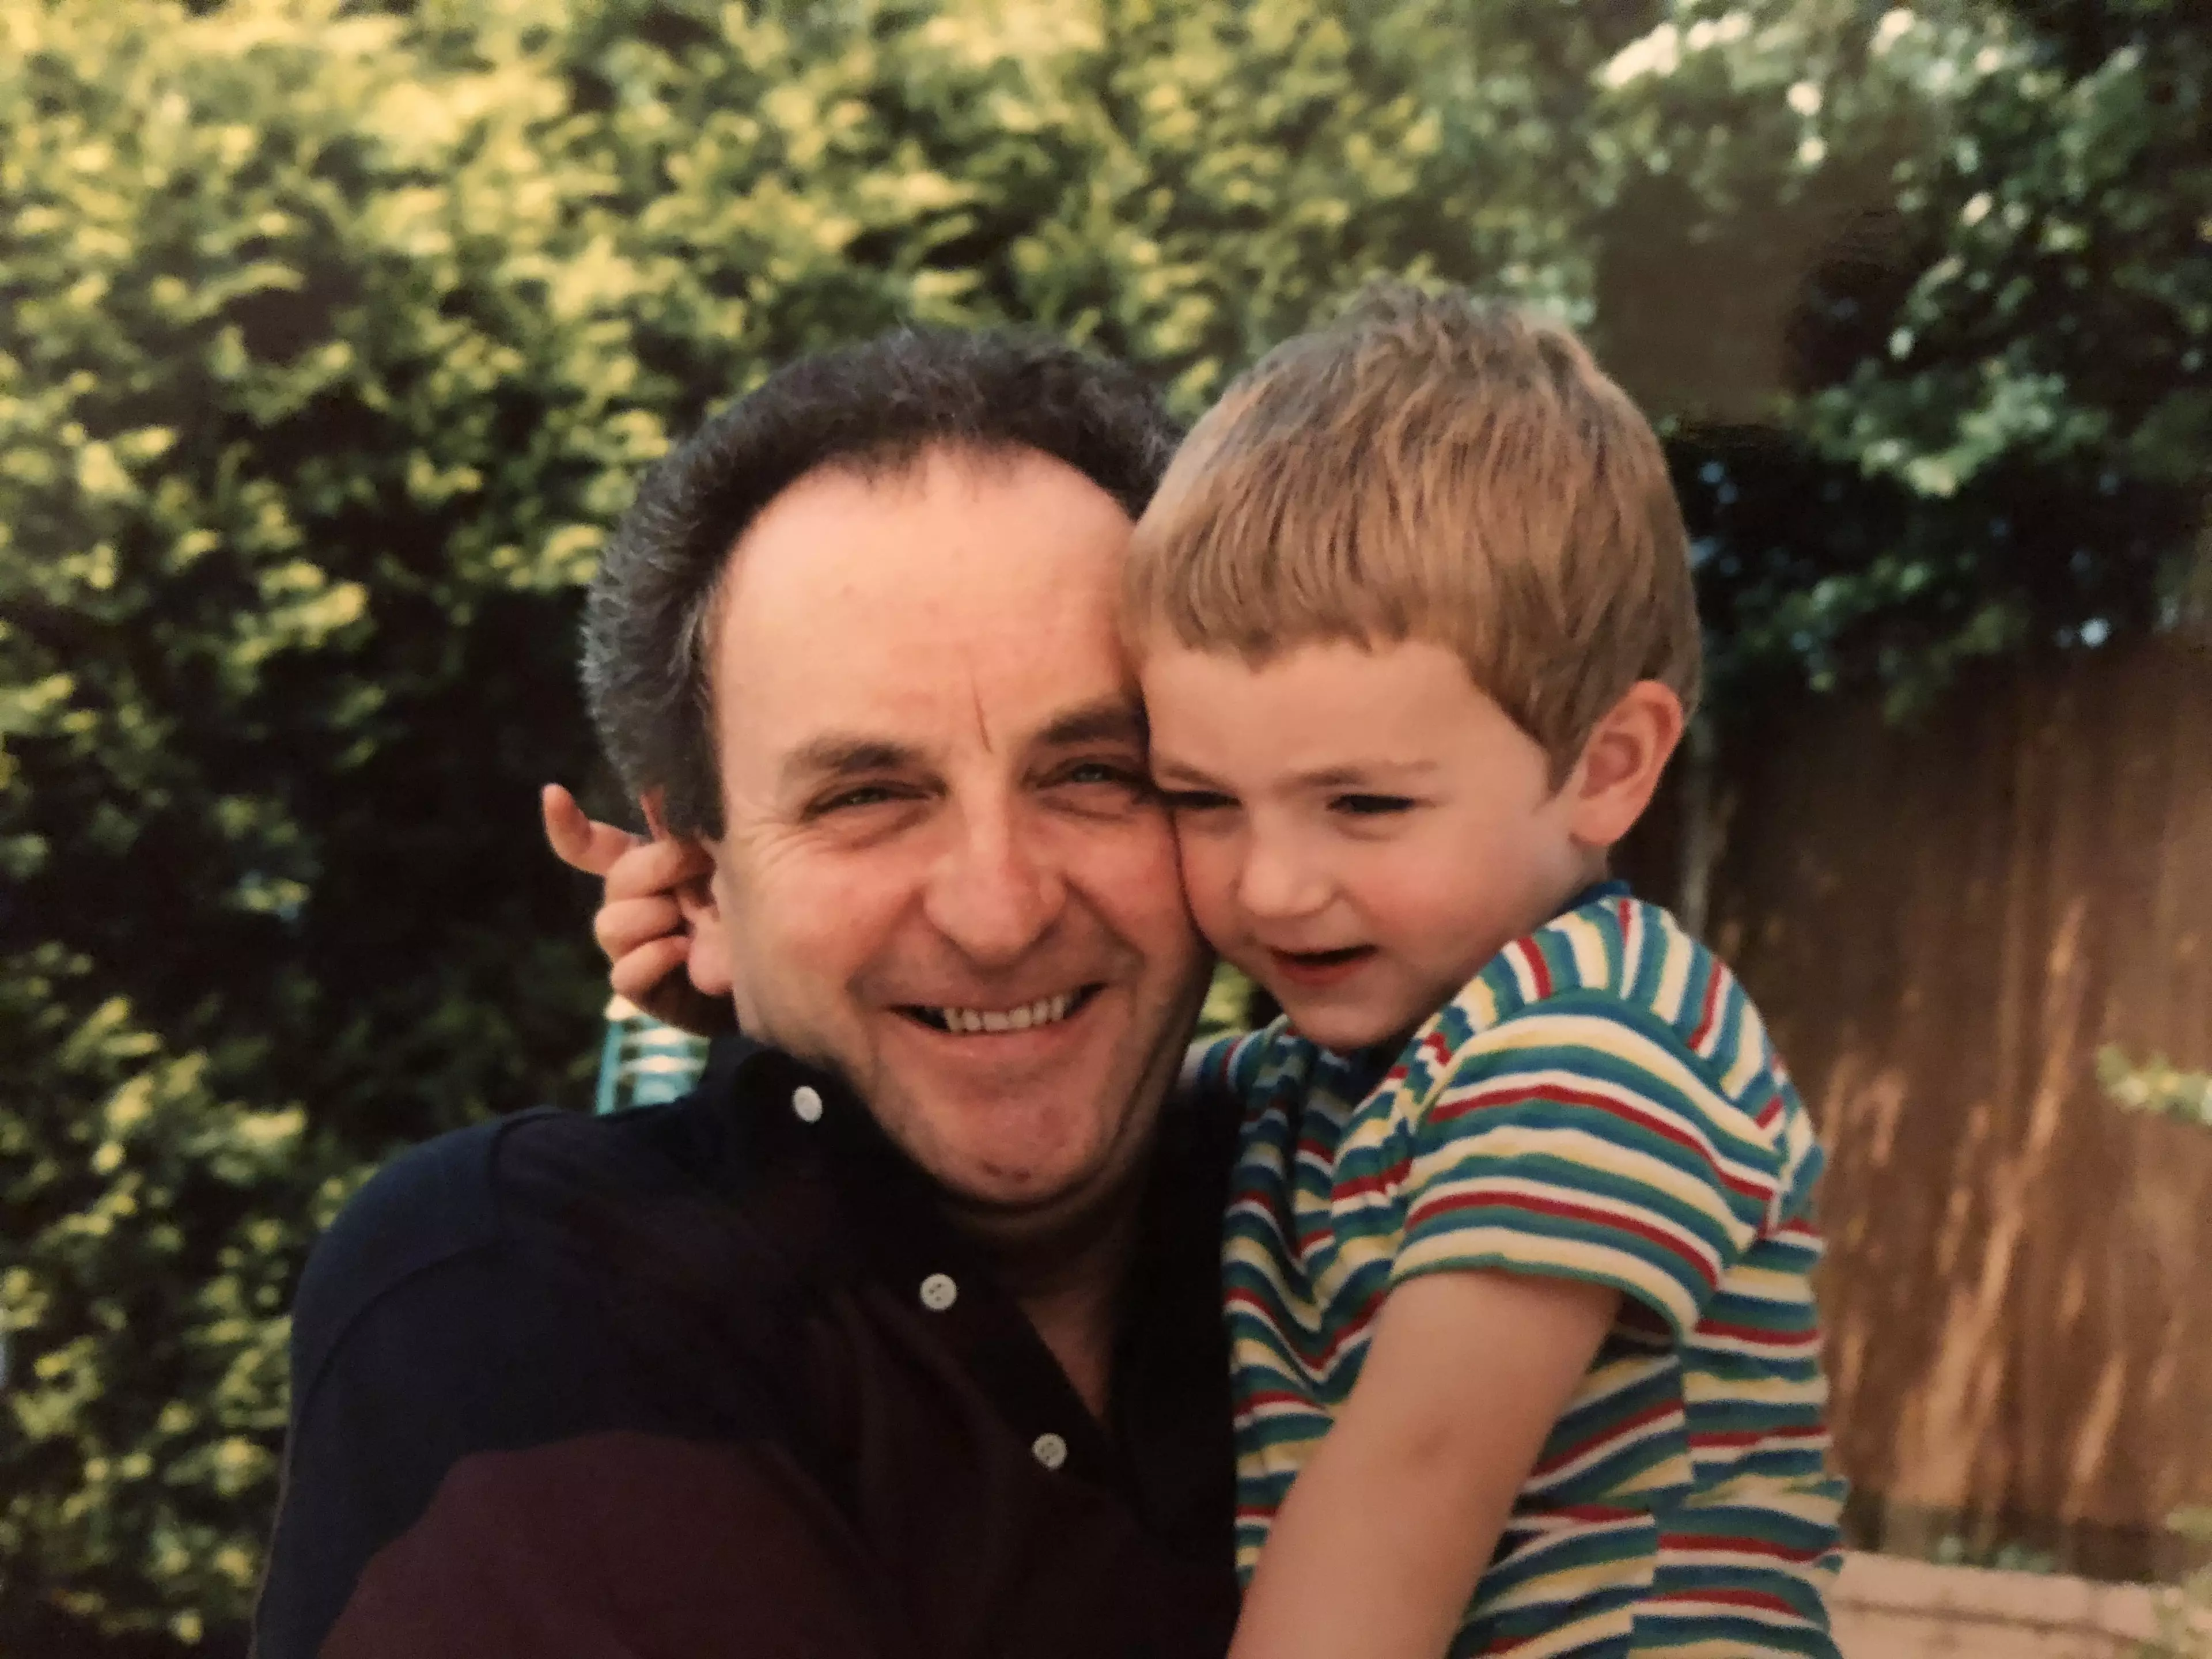 Simon and his dad in 1991.